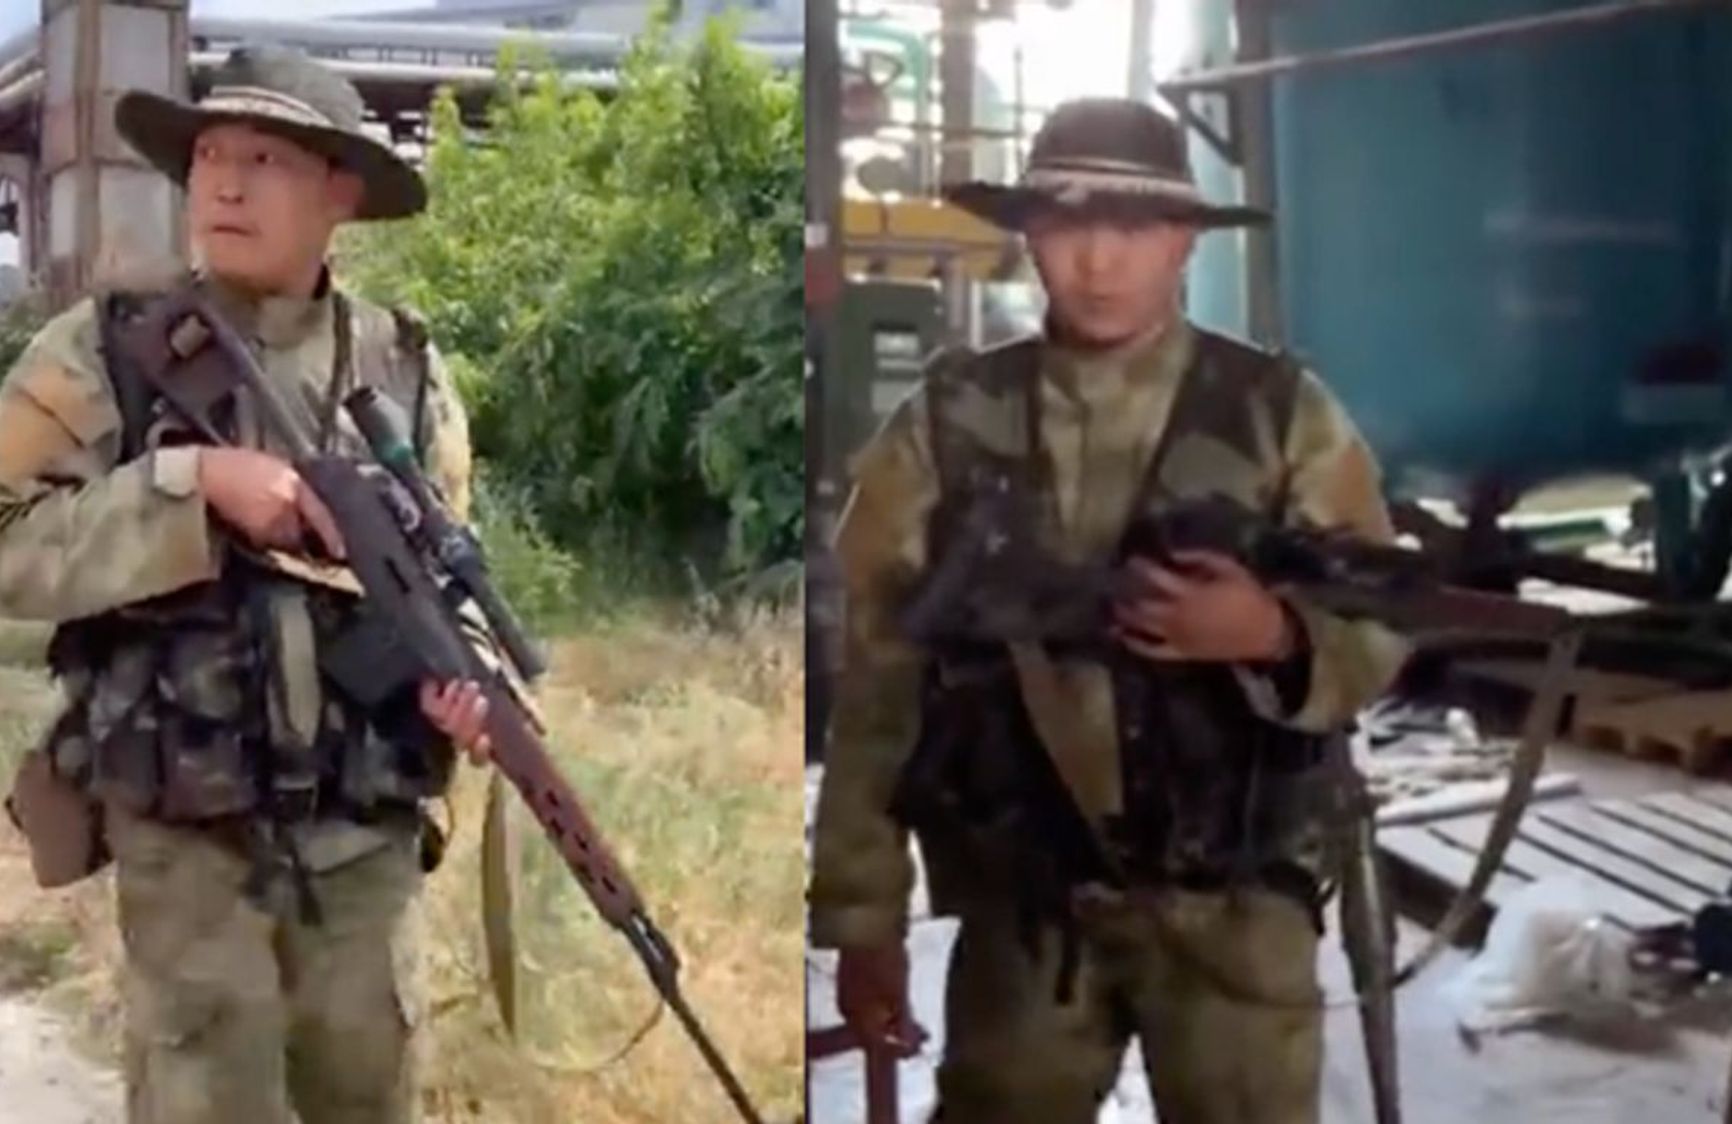 Two screenshots from a video report published by RT of “Akhmat” fighters at the Azot plant in Severodonetsk